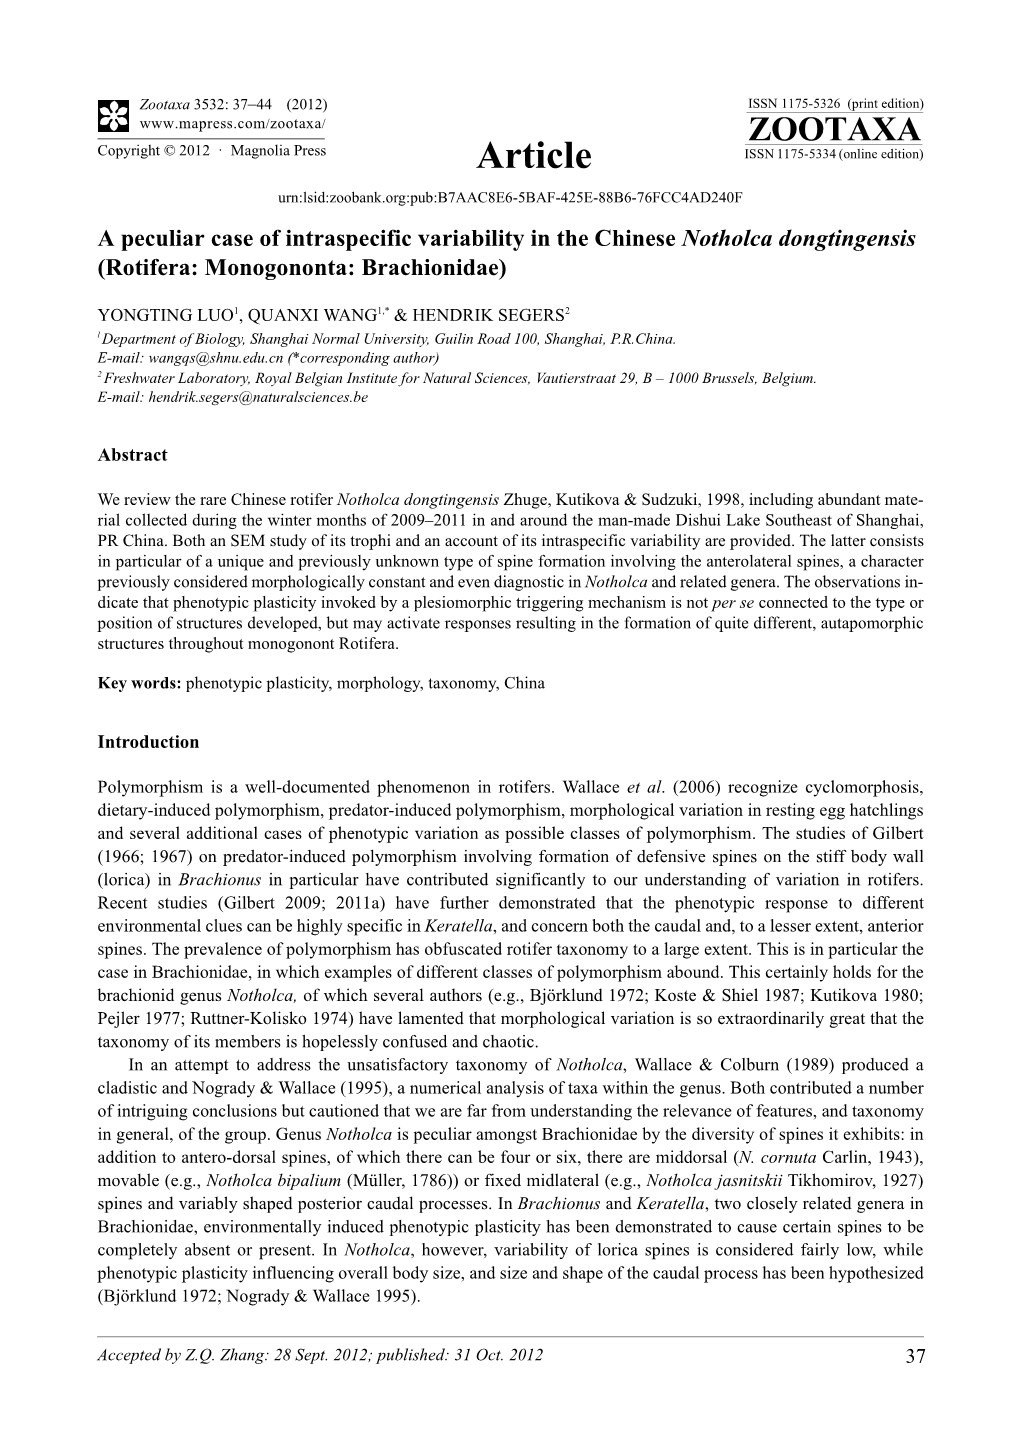 A Peculiar Case of Intraspecific Variability in the Chinese Notholca Dongtingensis (Rotifera: Monogononta: Brachionidae)